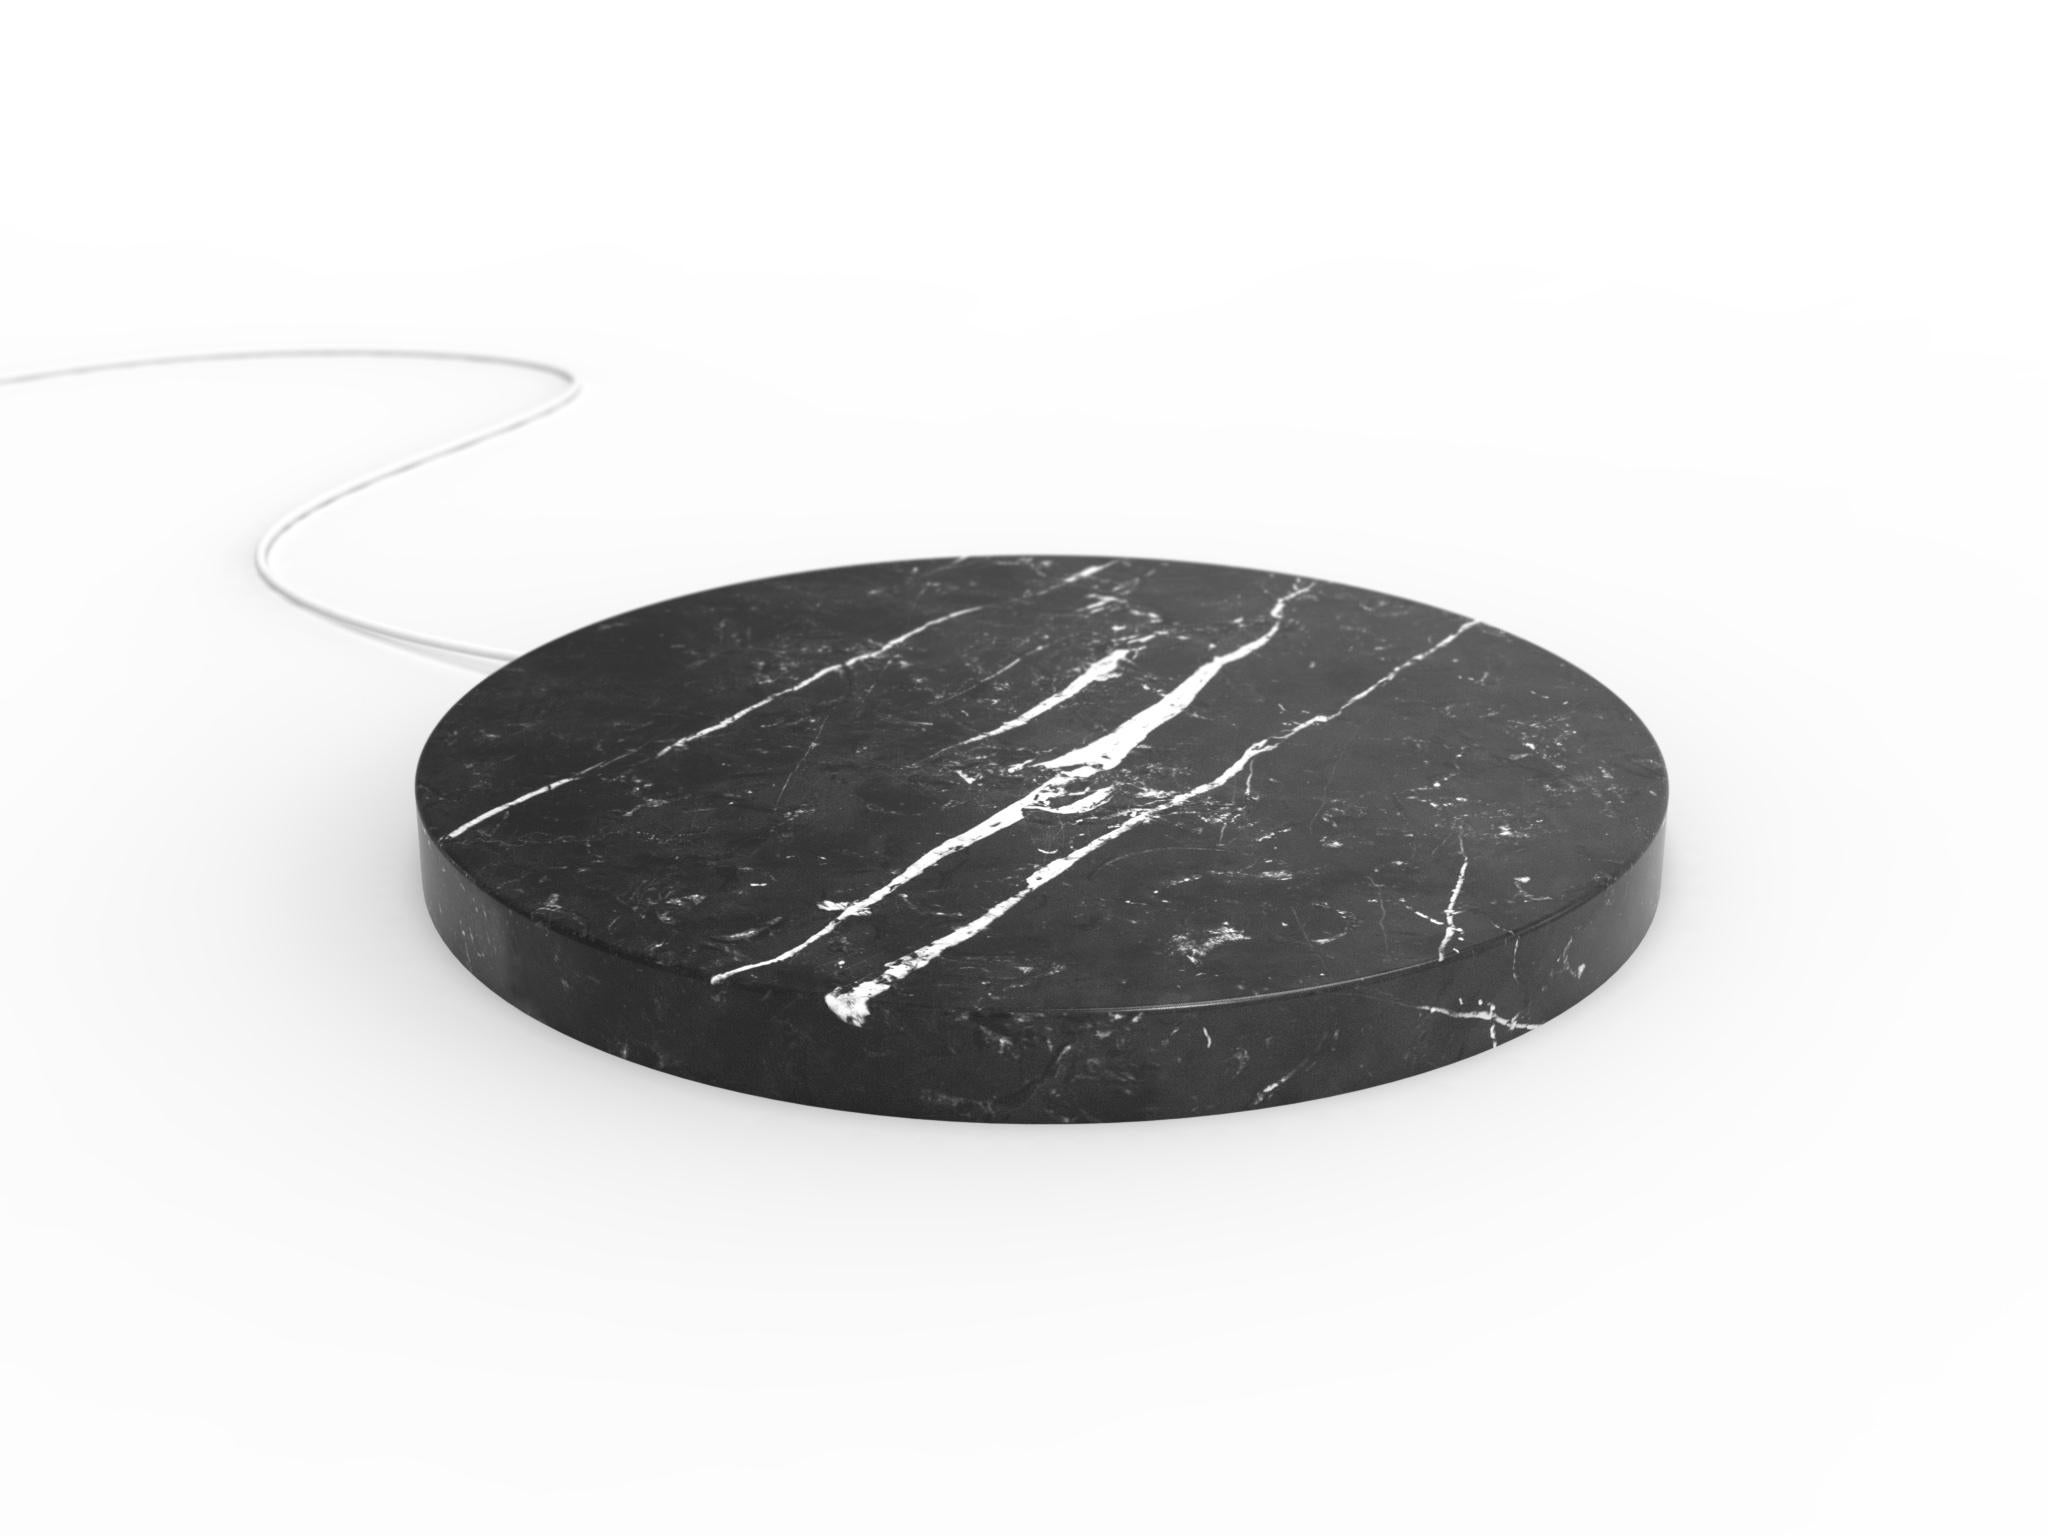 A marble base,
that quickly charge your phone, with a touch of magic.
 
A circle, 
a stone, 
realized with the care that marble requires.

A powerful wireless charging technology ensures an efficient and reliable power delivery.

The result is a